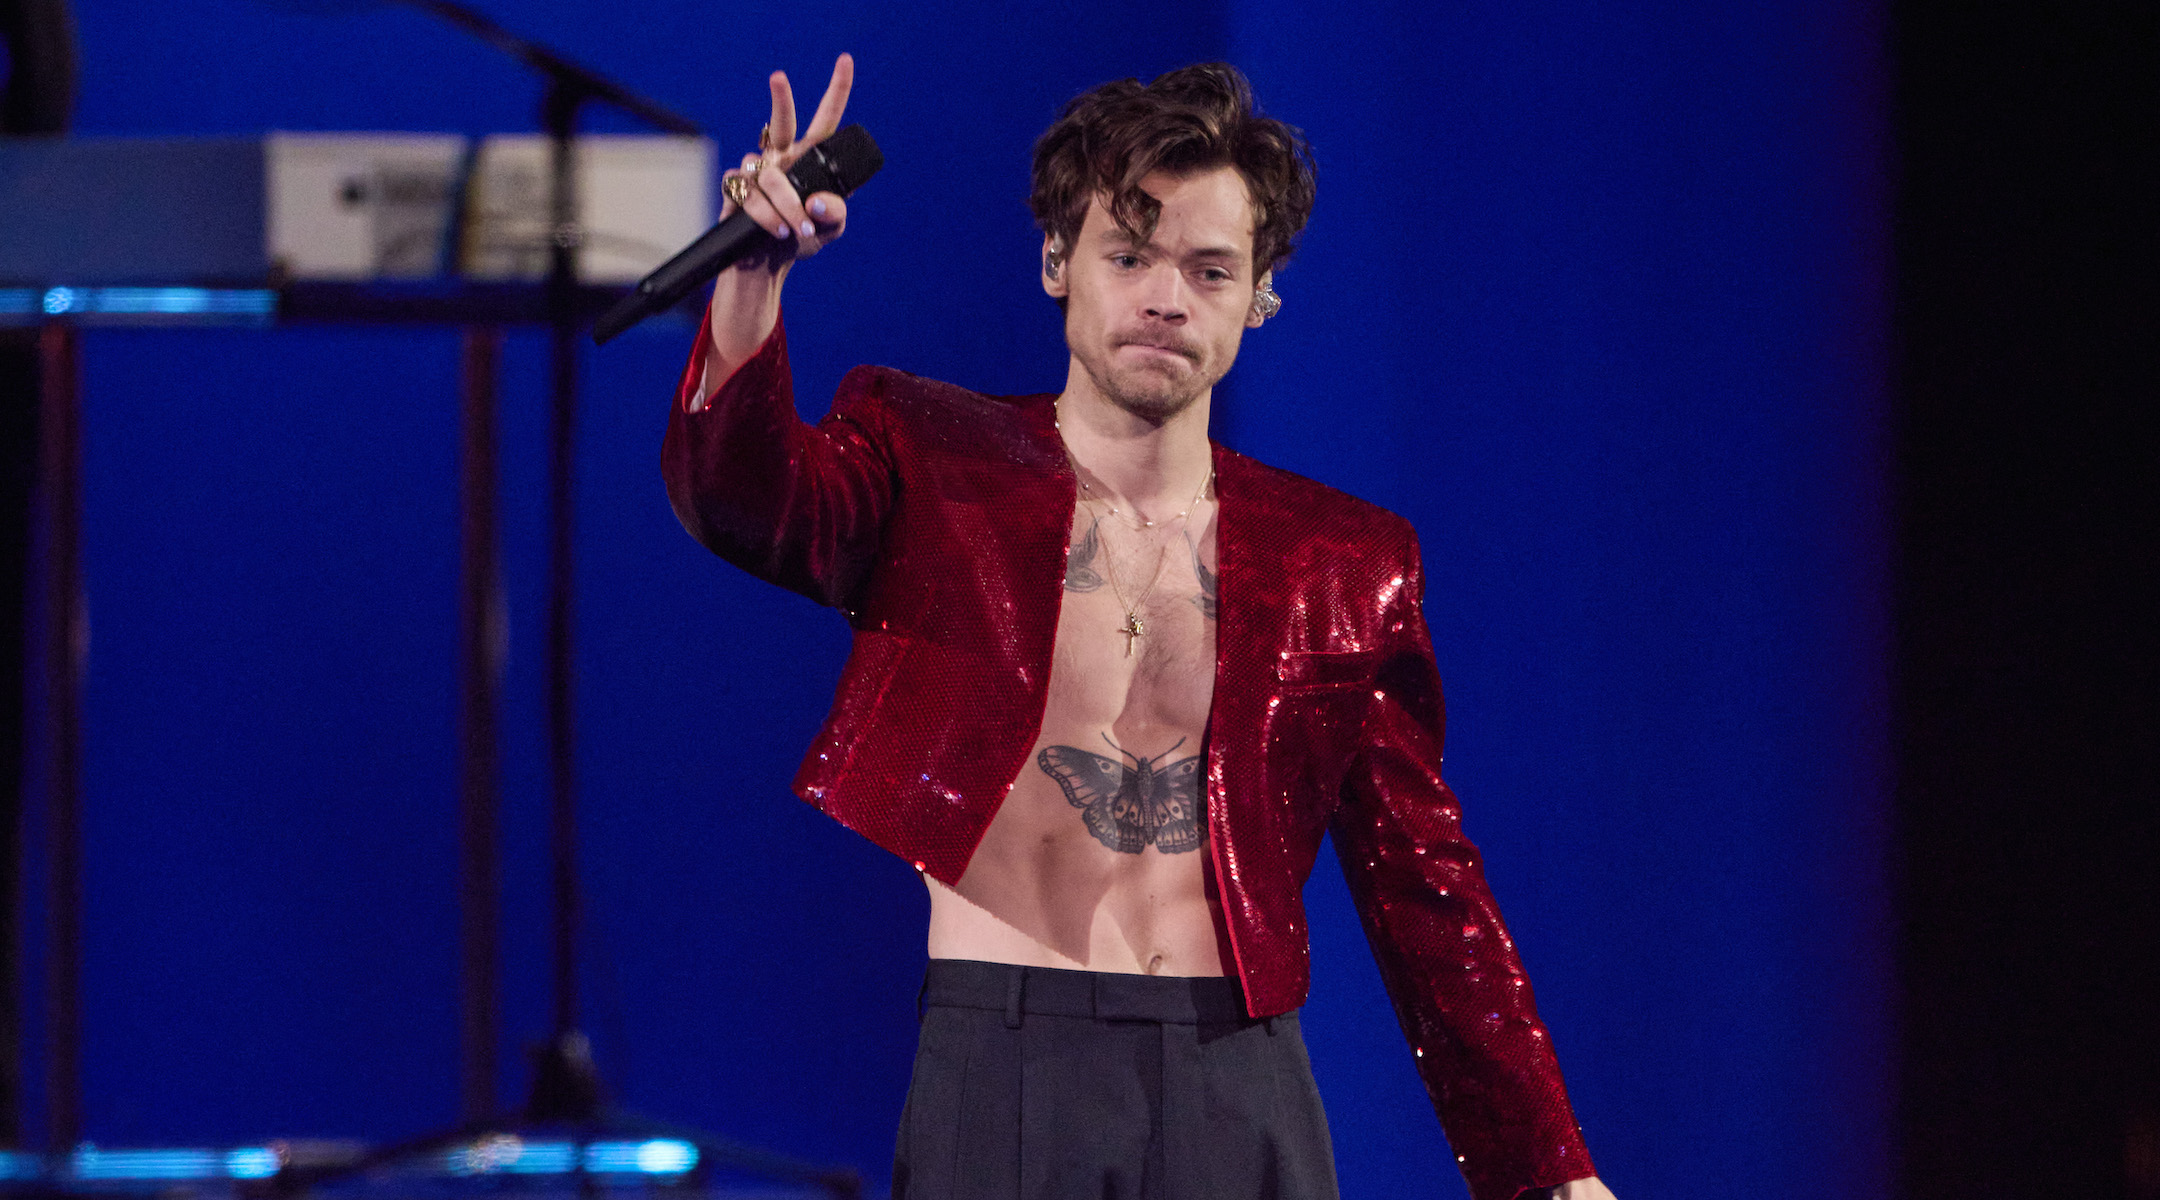 Harry Styles performs at the Brit Awards